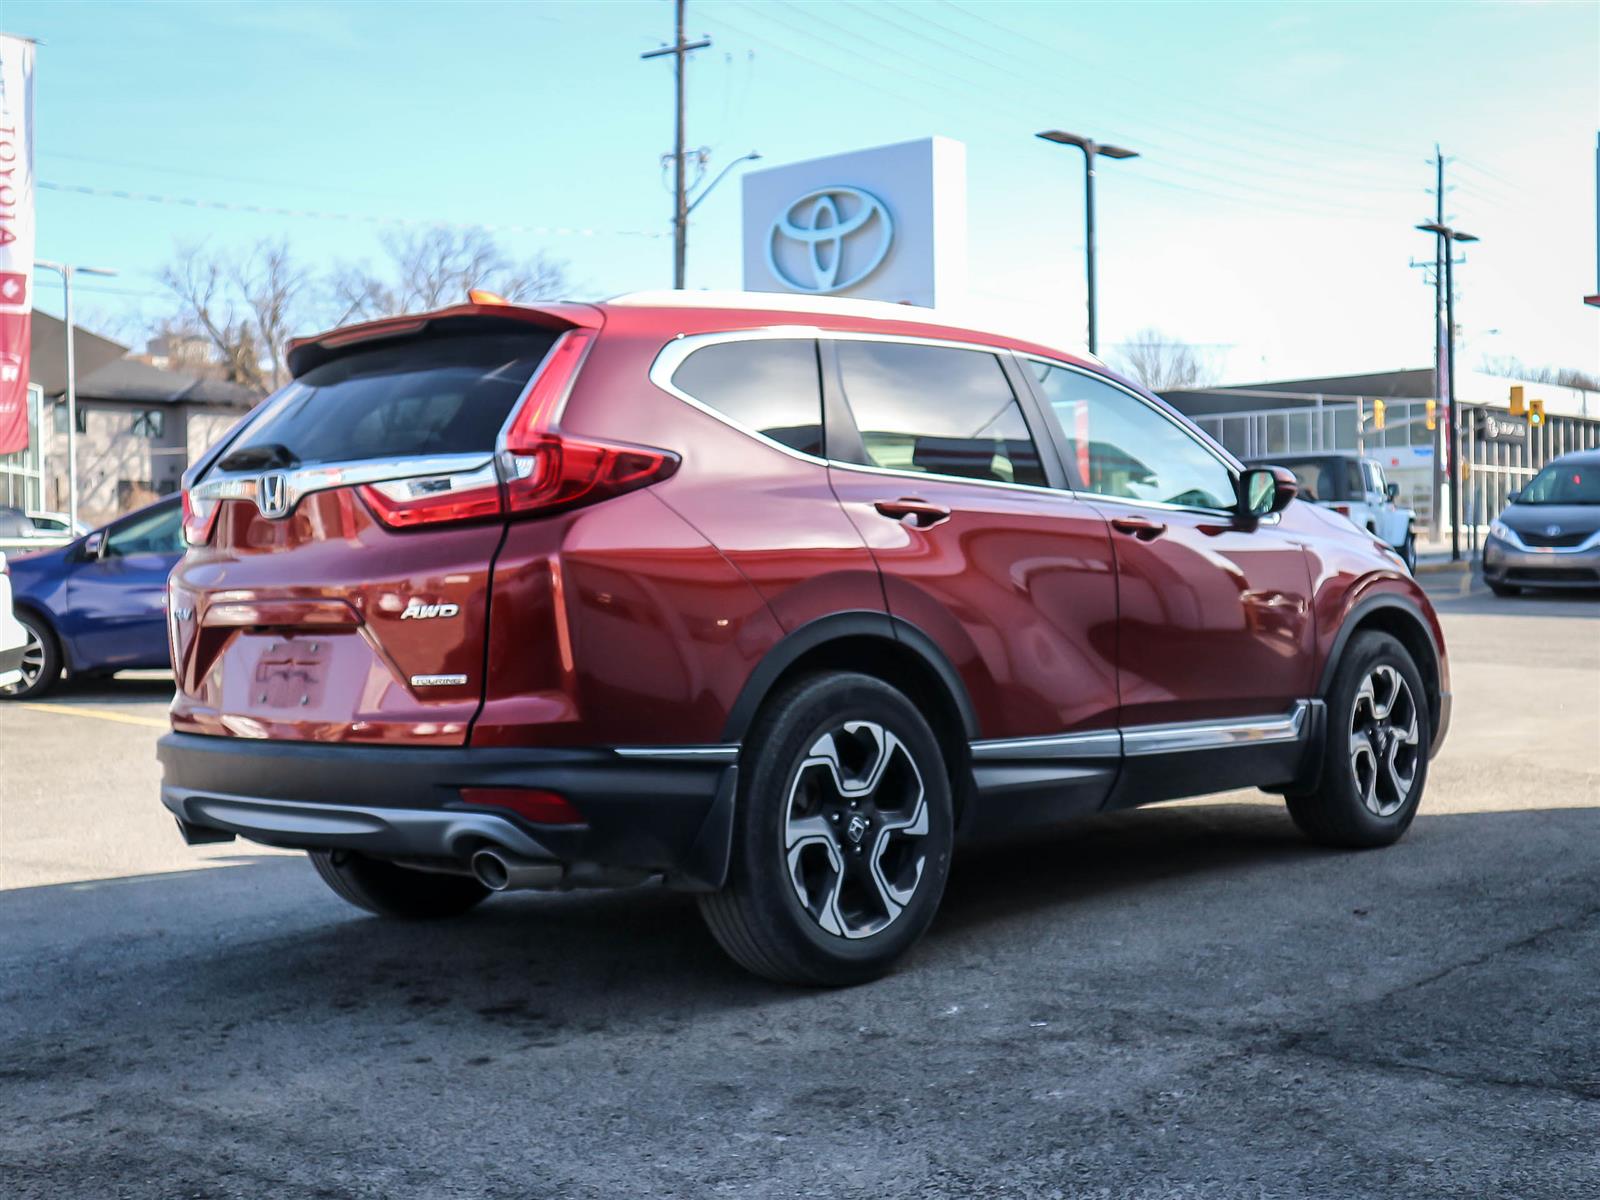 49 Popular 2019 honda cr v exterior and interior colors with Sample Images